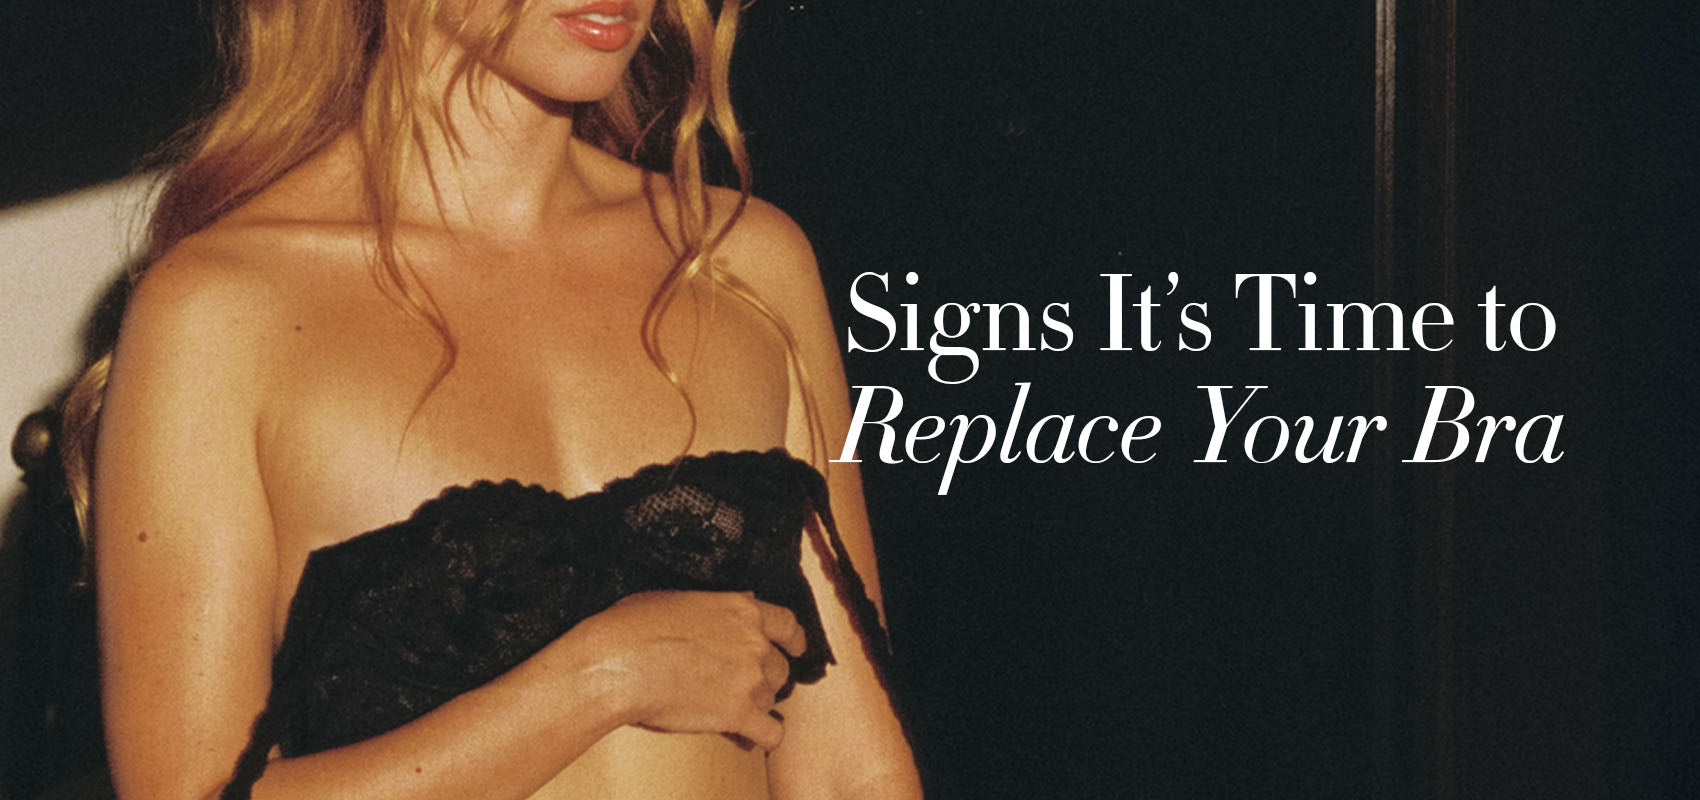 Signs It's Time to Replace Your Bra